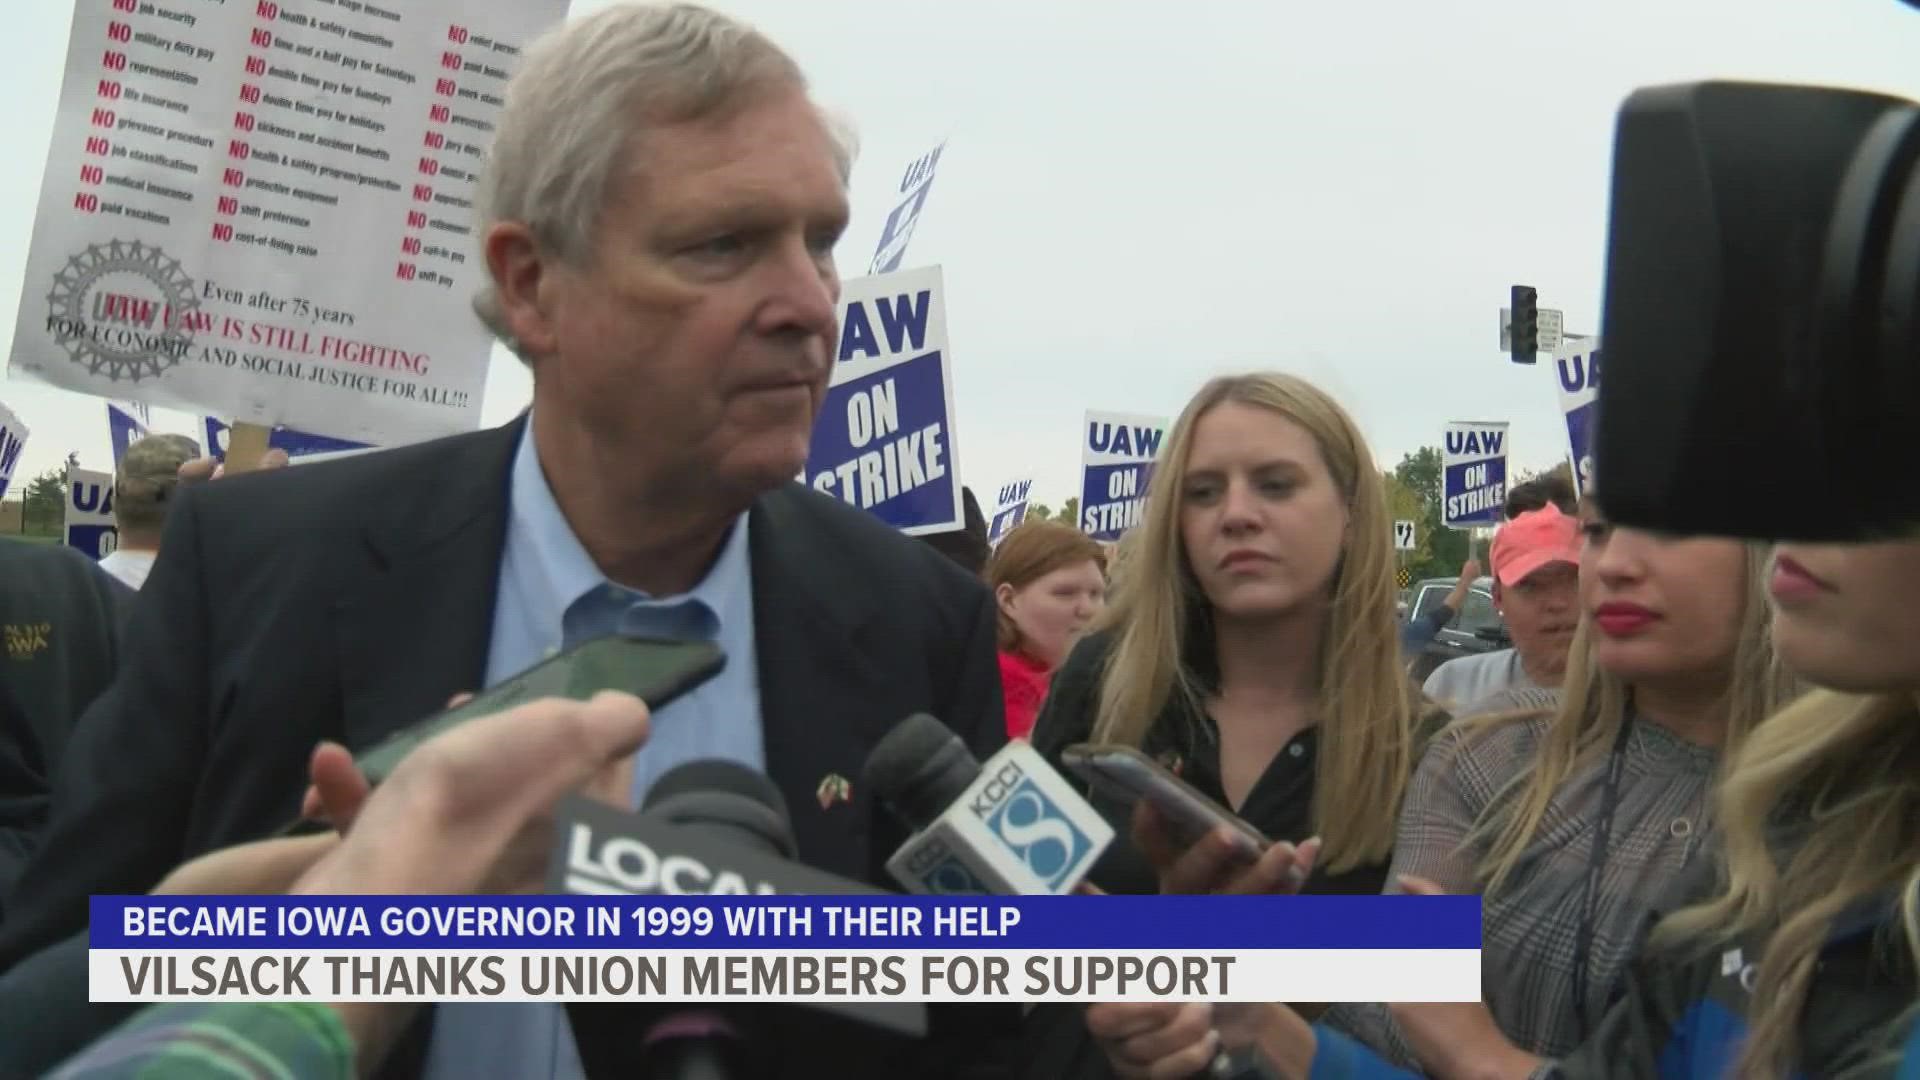 The former Iowa governor told union workers picketing at the Ankeny John Deere plant he wanted to support them like they supported him in his campaign.